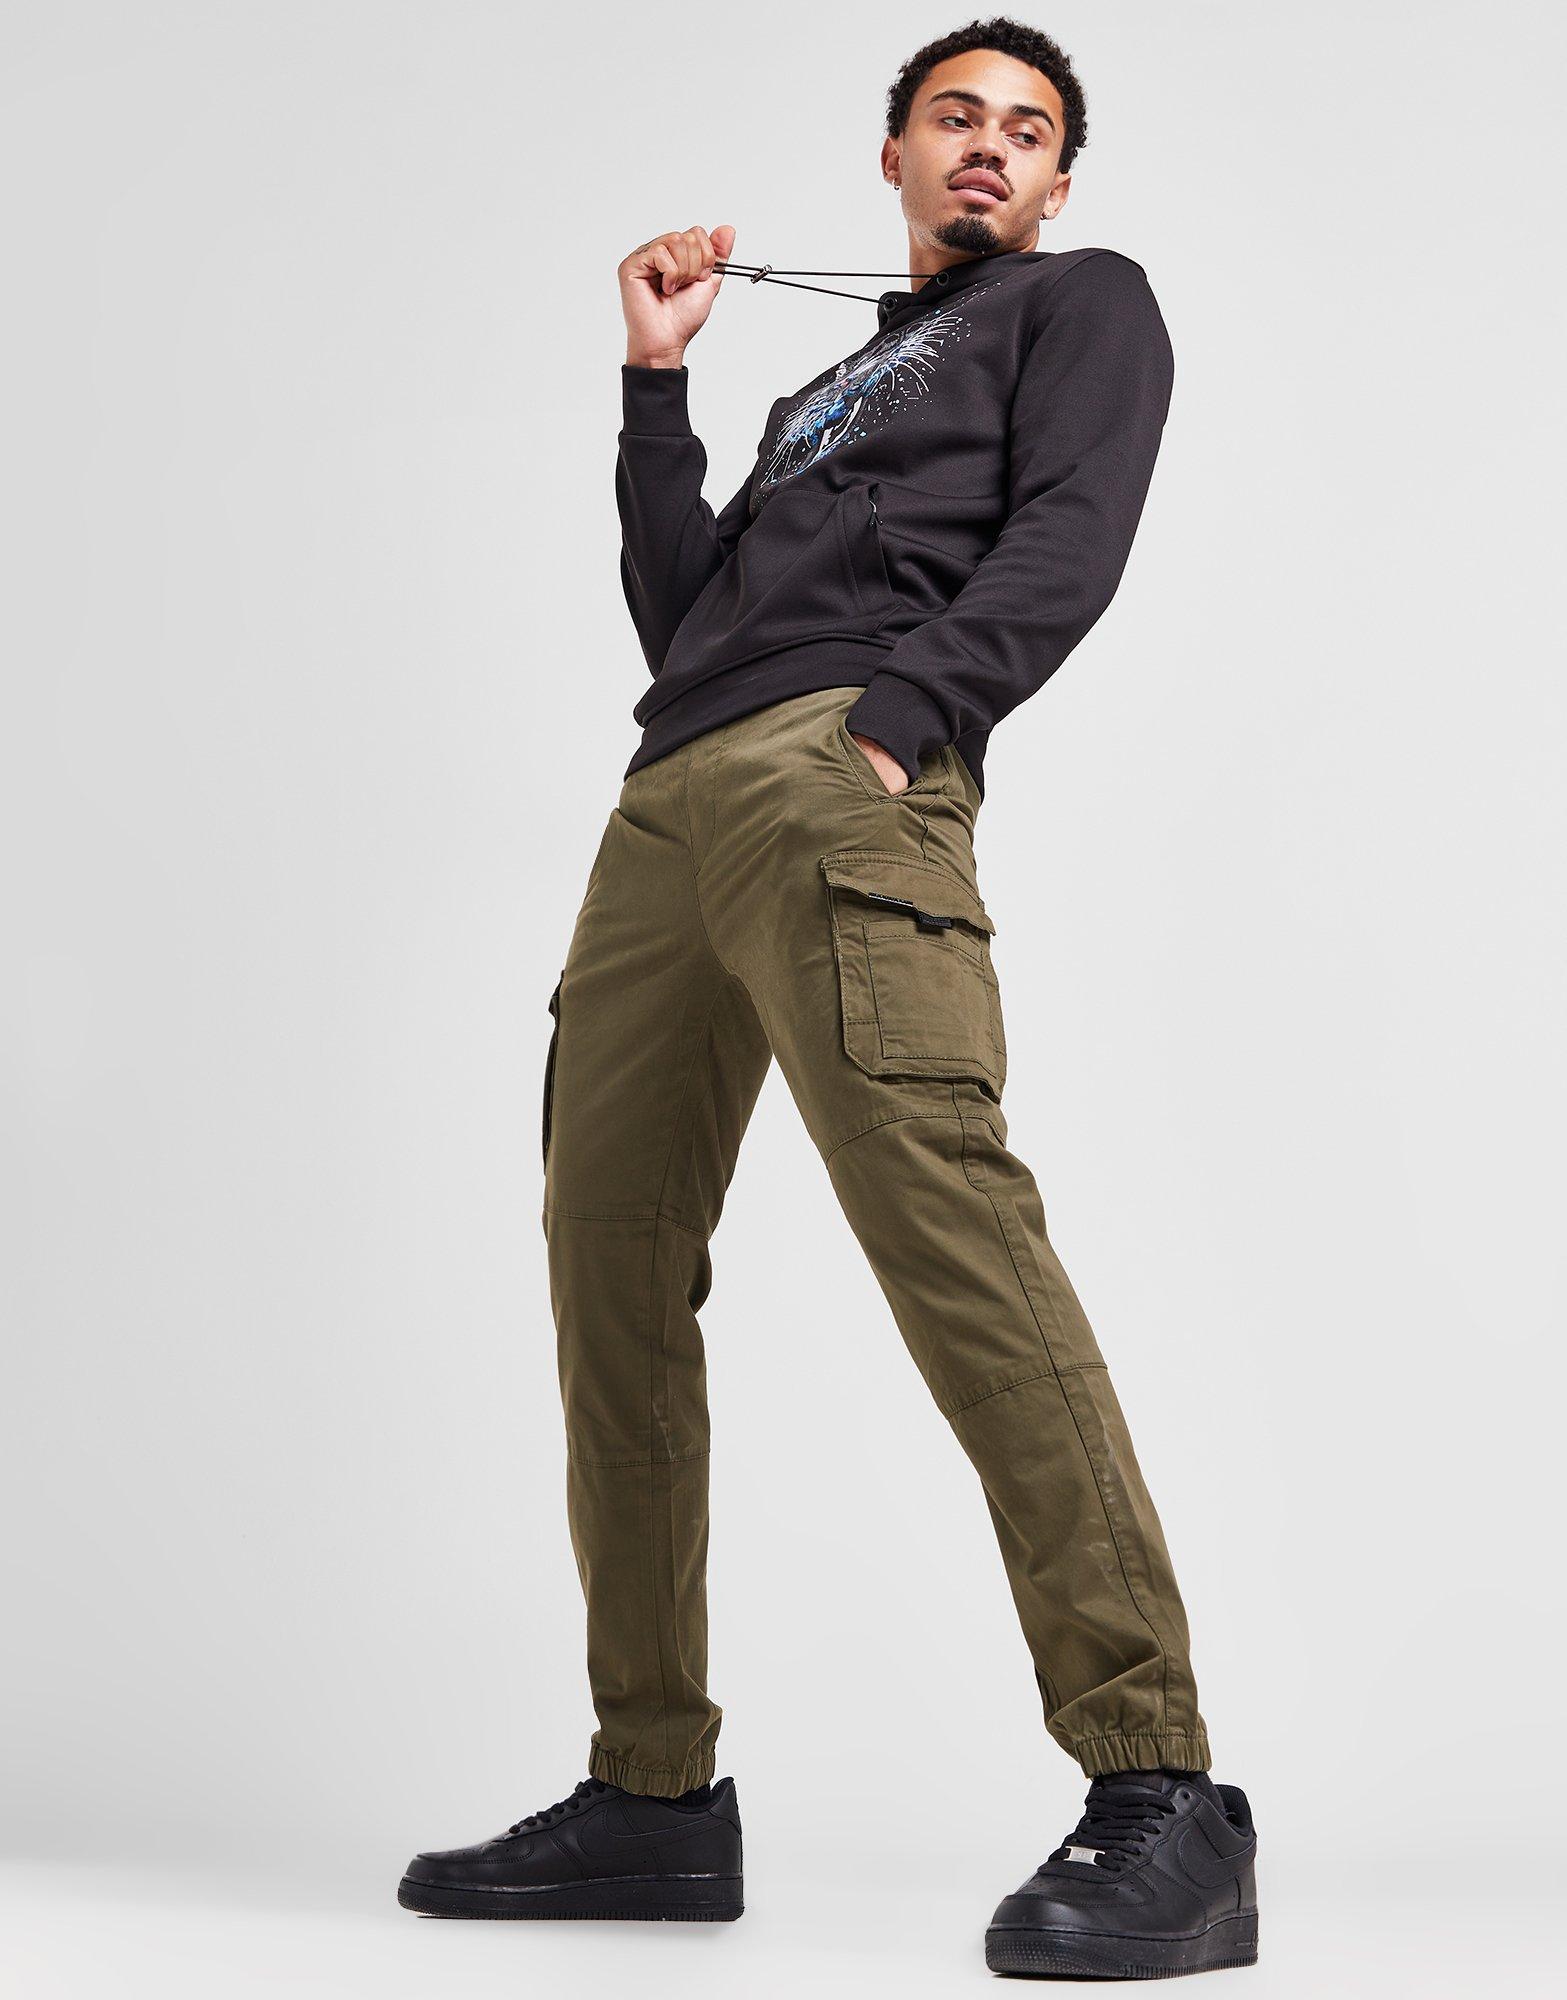 Olive Sweatpants Outfits For Men (81 ideas & outfits)